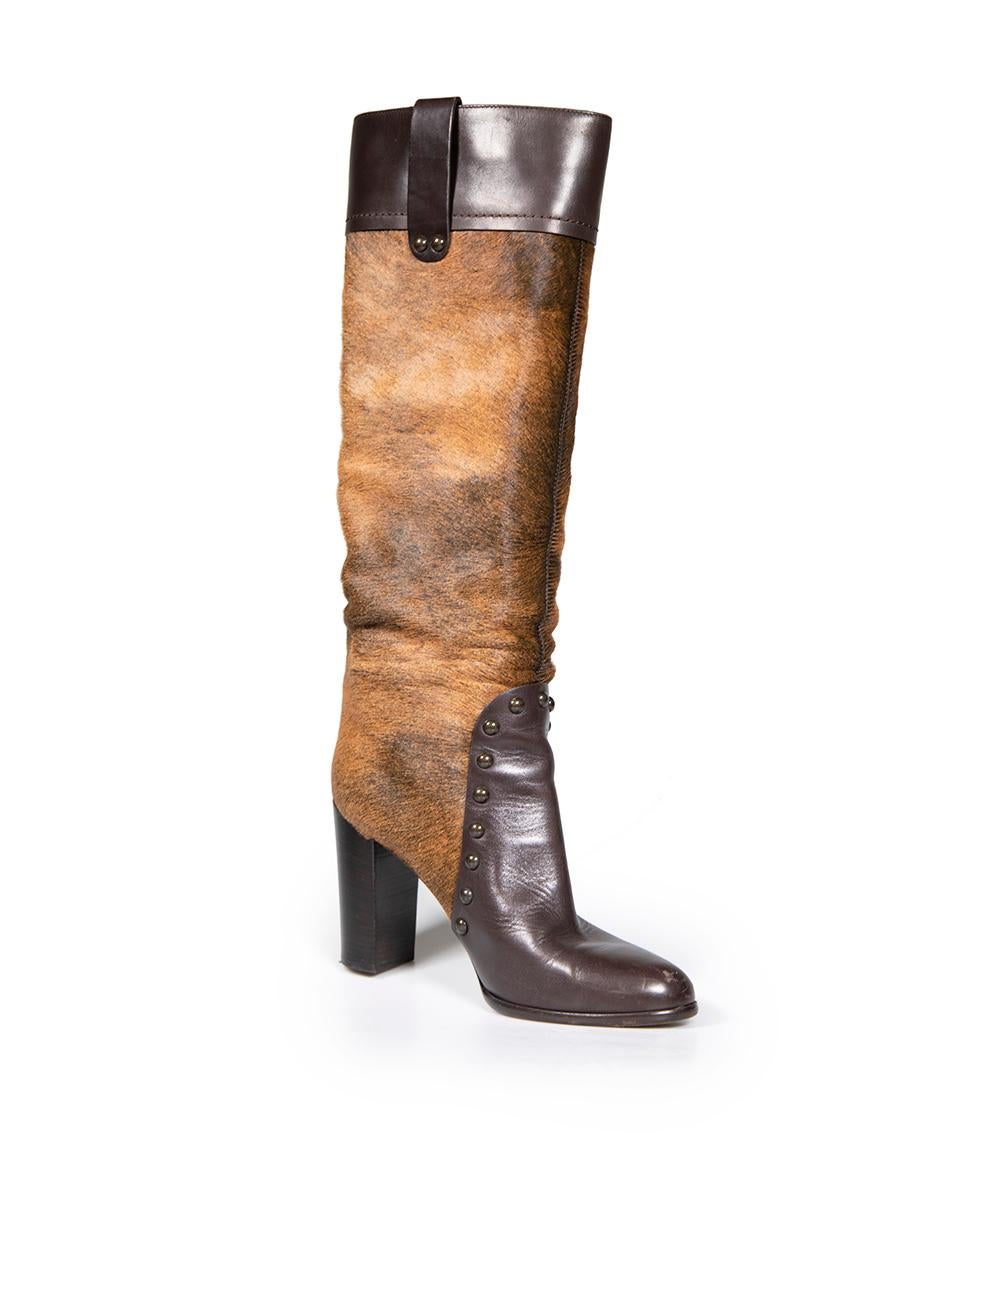 CONDITION is Very good. Minimal wear to boots is evident. Minimal wear to the toes and heels of both boots with abrasions and scratches on this used Sergio Rossi designer resale item.
 
 
 
 Details
 
 
 Brown
 
 Pony hair calfskin
 
 Knee high